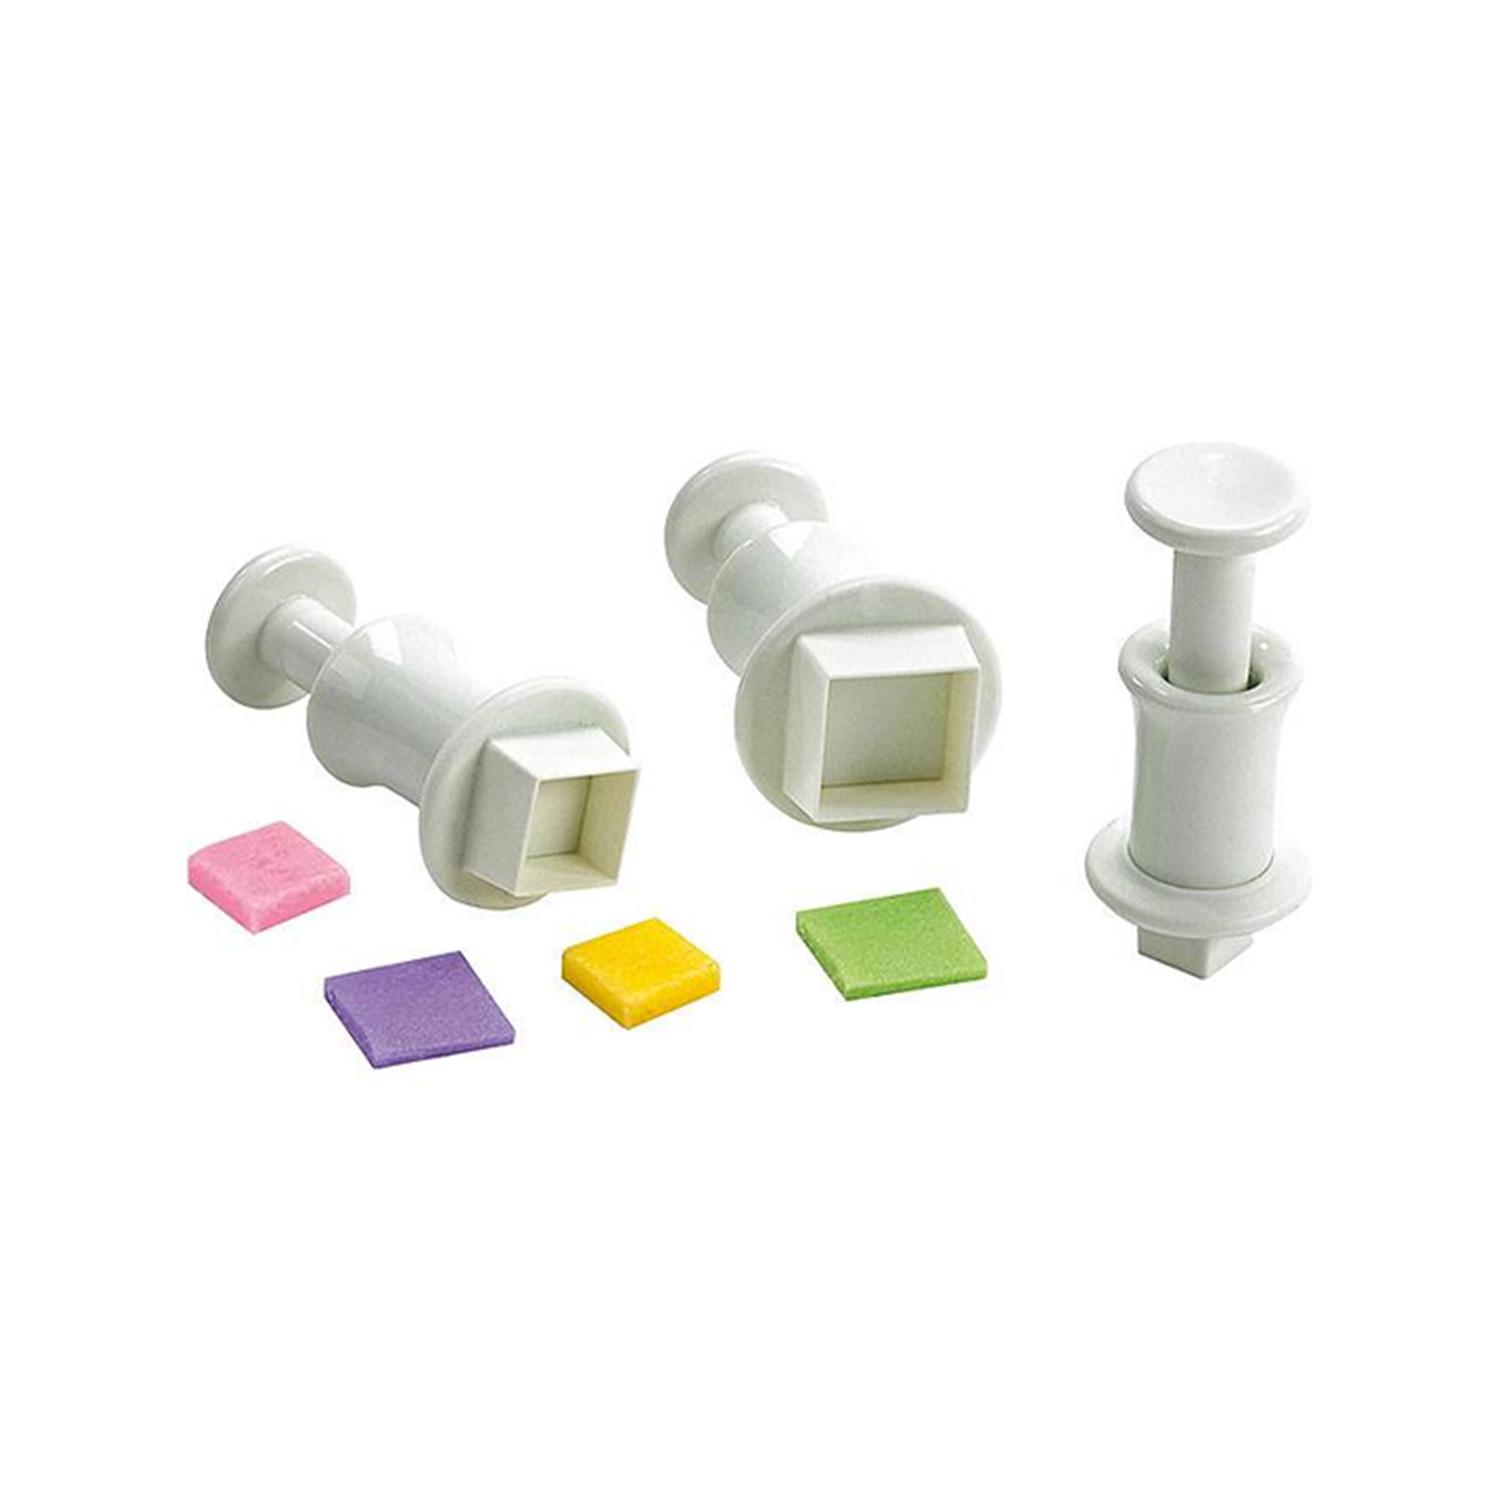 SET OF 3 SQUARE PLUNGER CUTTER